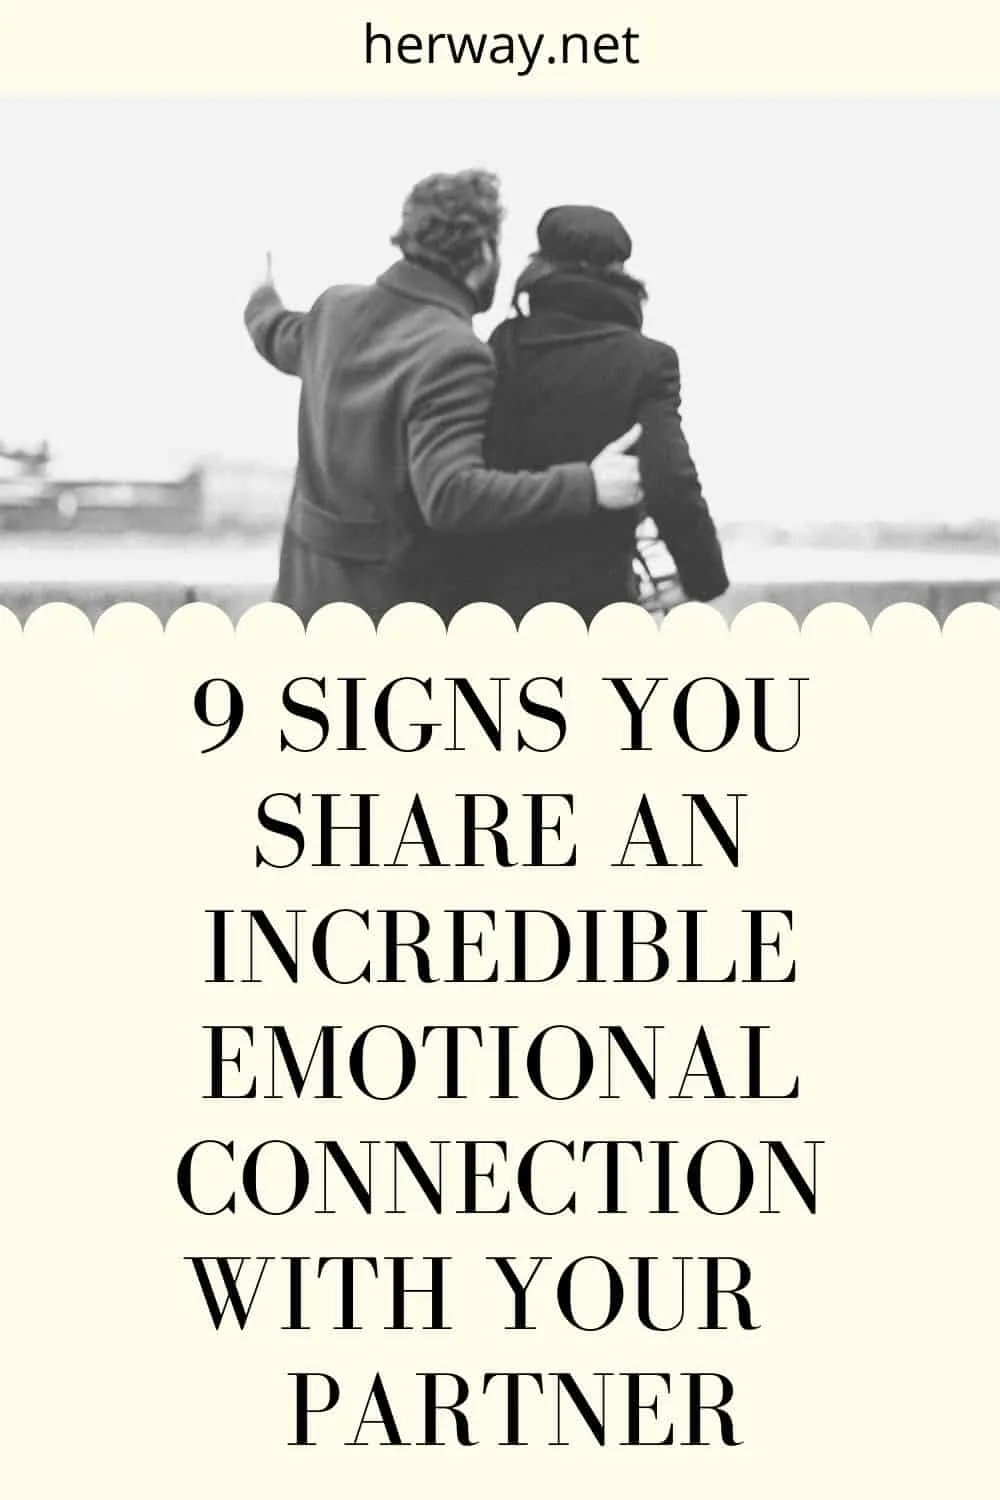 9 Signs You Share An Incredible Emotional Connection With Your Partner